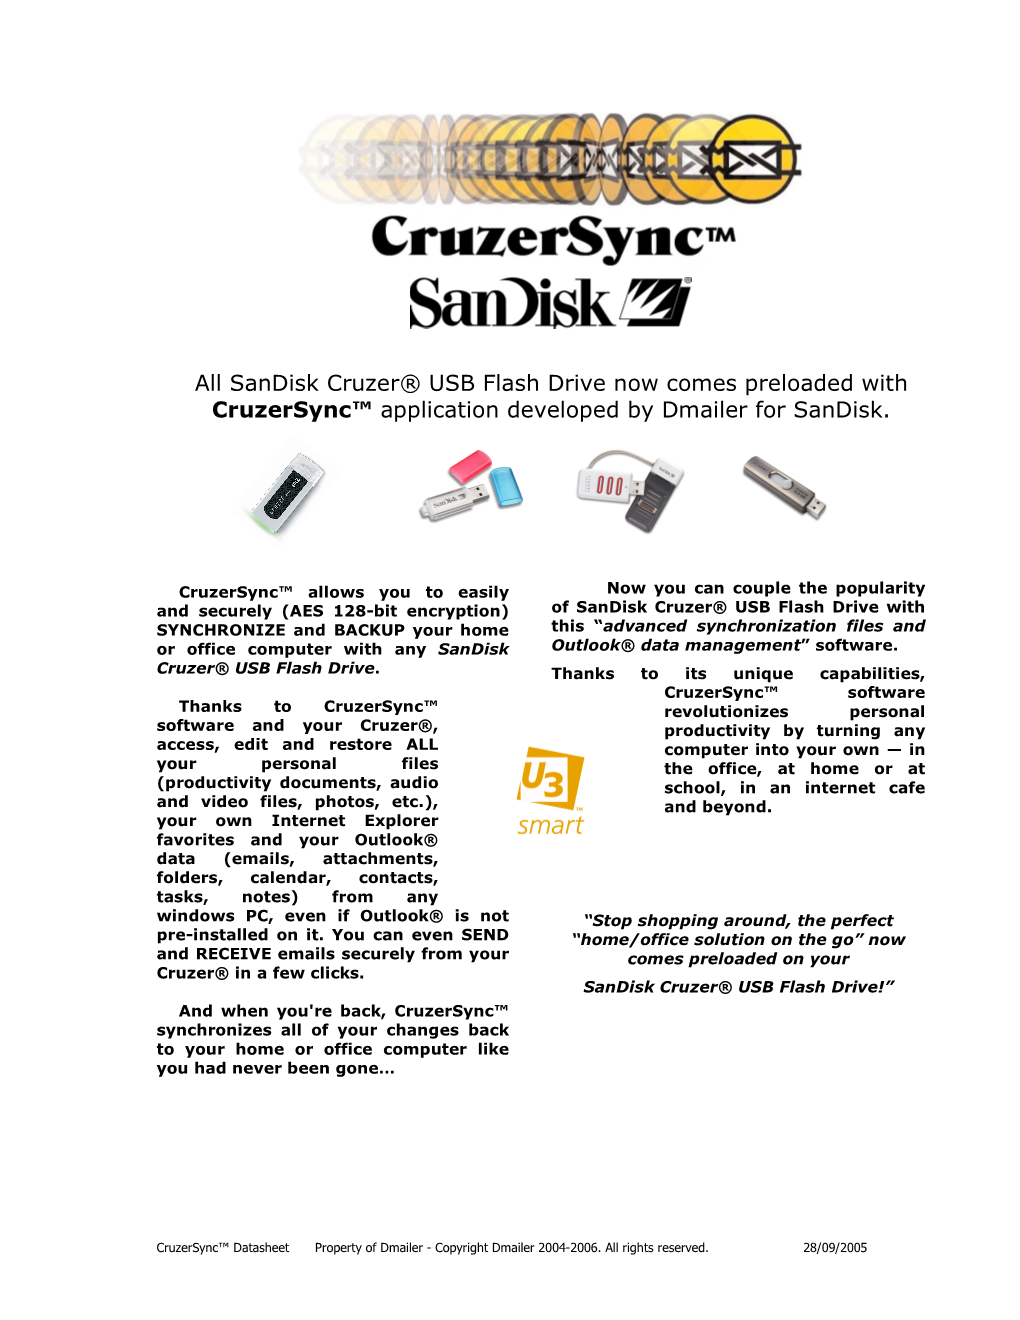 All Sandisk Cruzer® USB Flash Drive Now Comes Preloaded with Cruzersync™ Application Developed by Dmailer for Sandisk